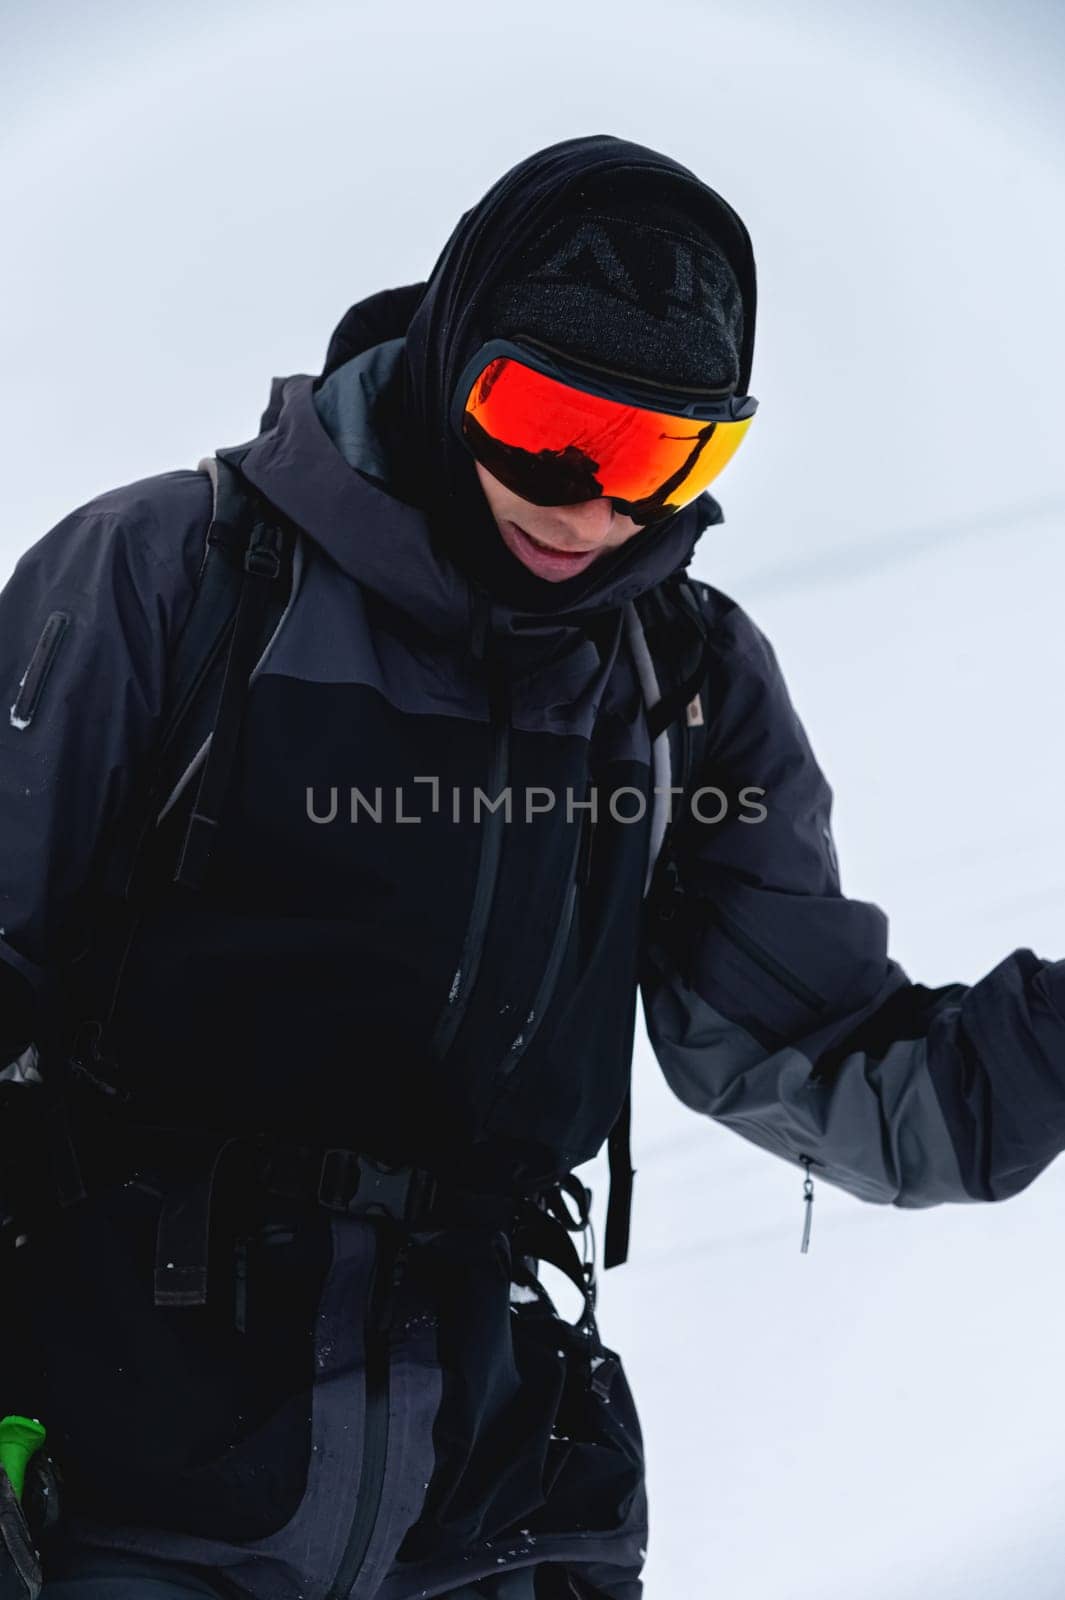 Portrait of a skier in safe ski equipment, standing and relaxing smiling while on vacation on the ski slope by yanik88